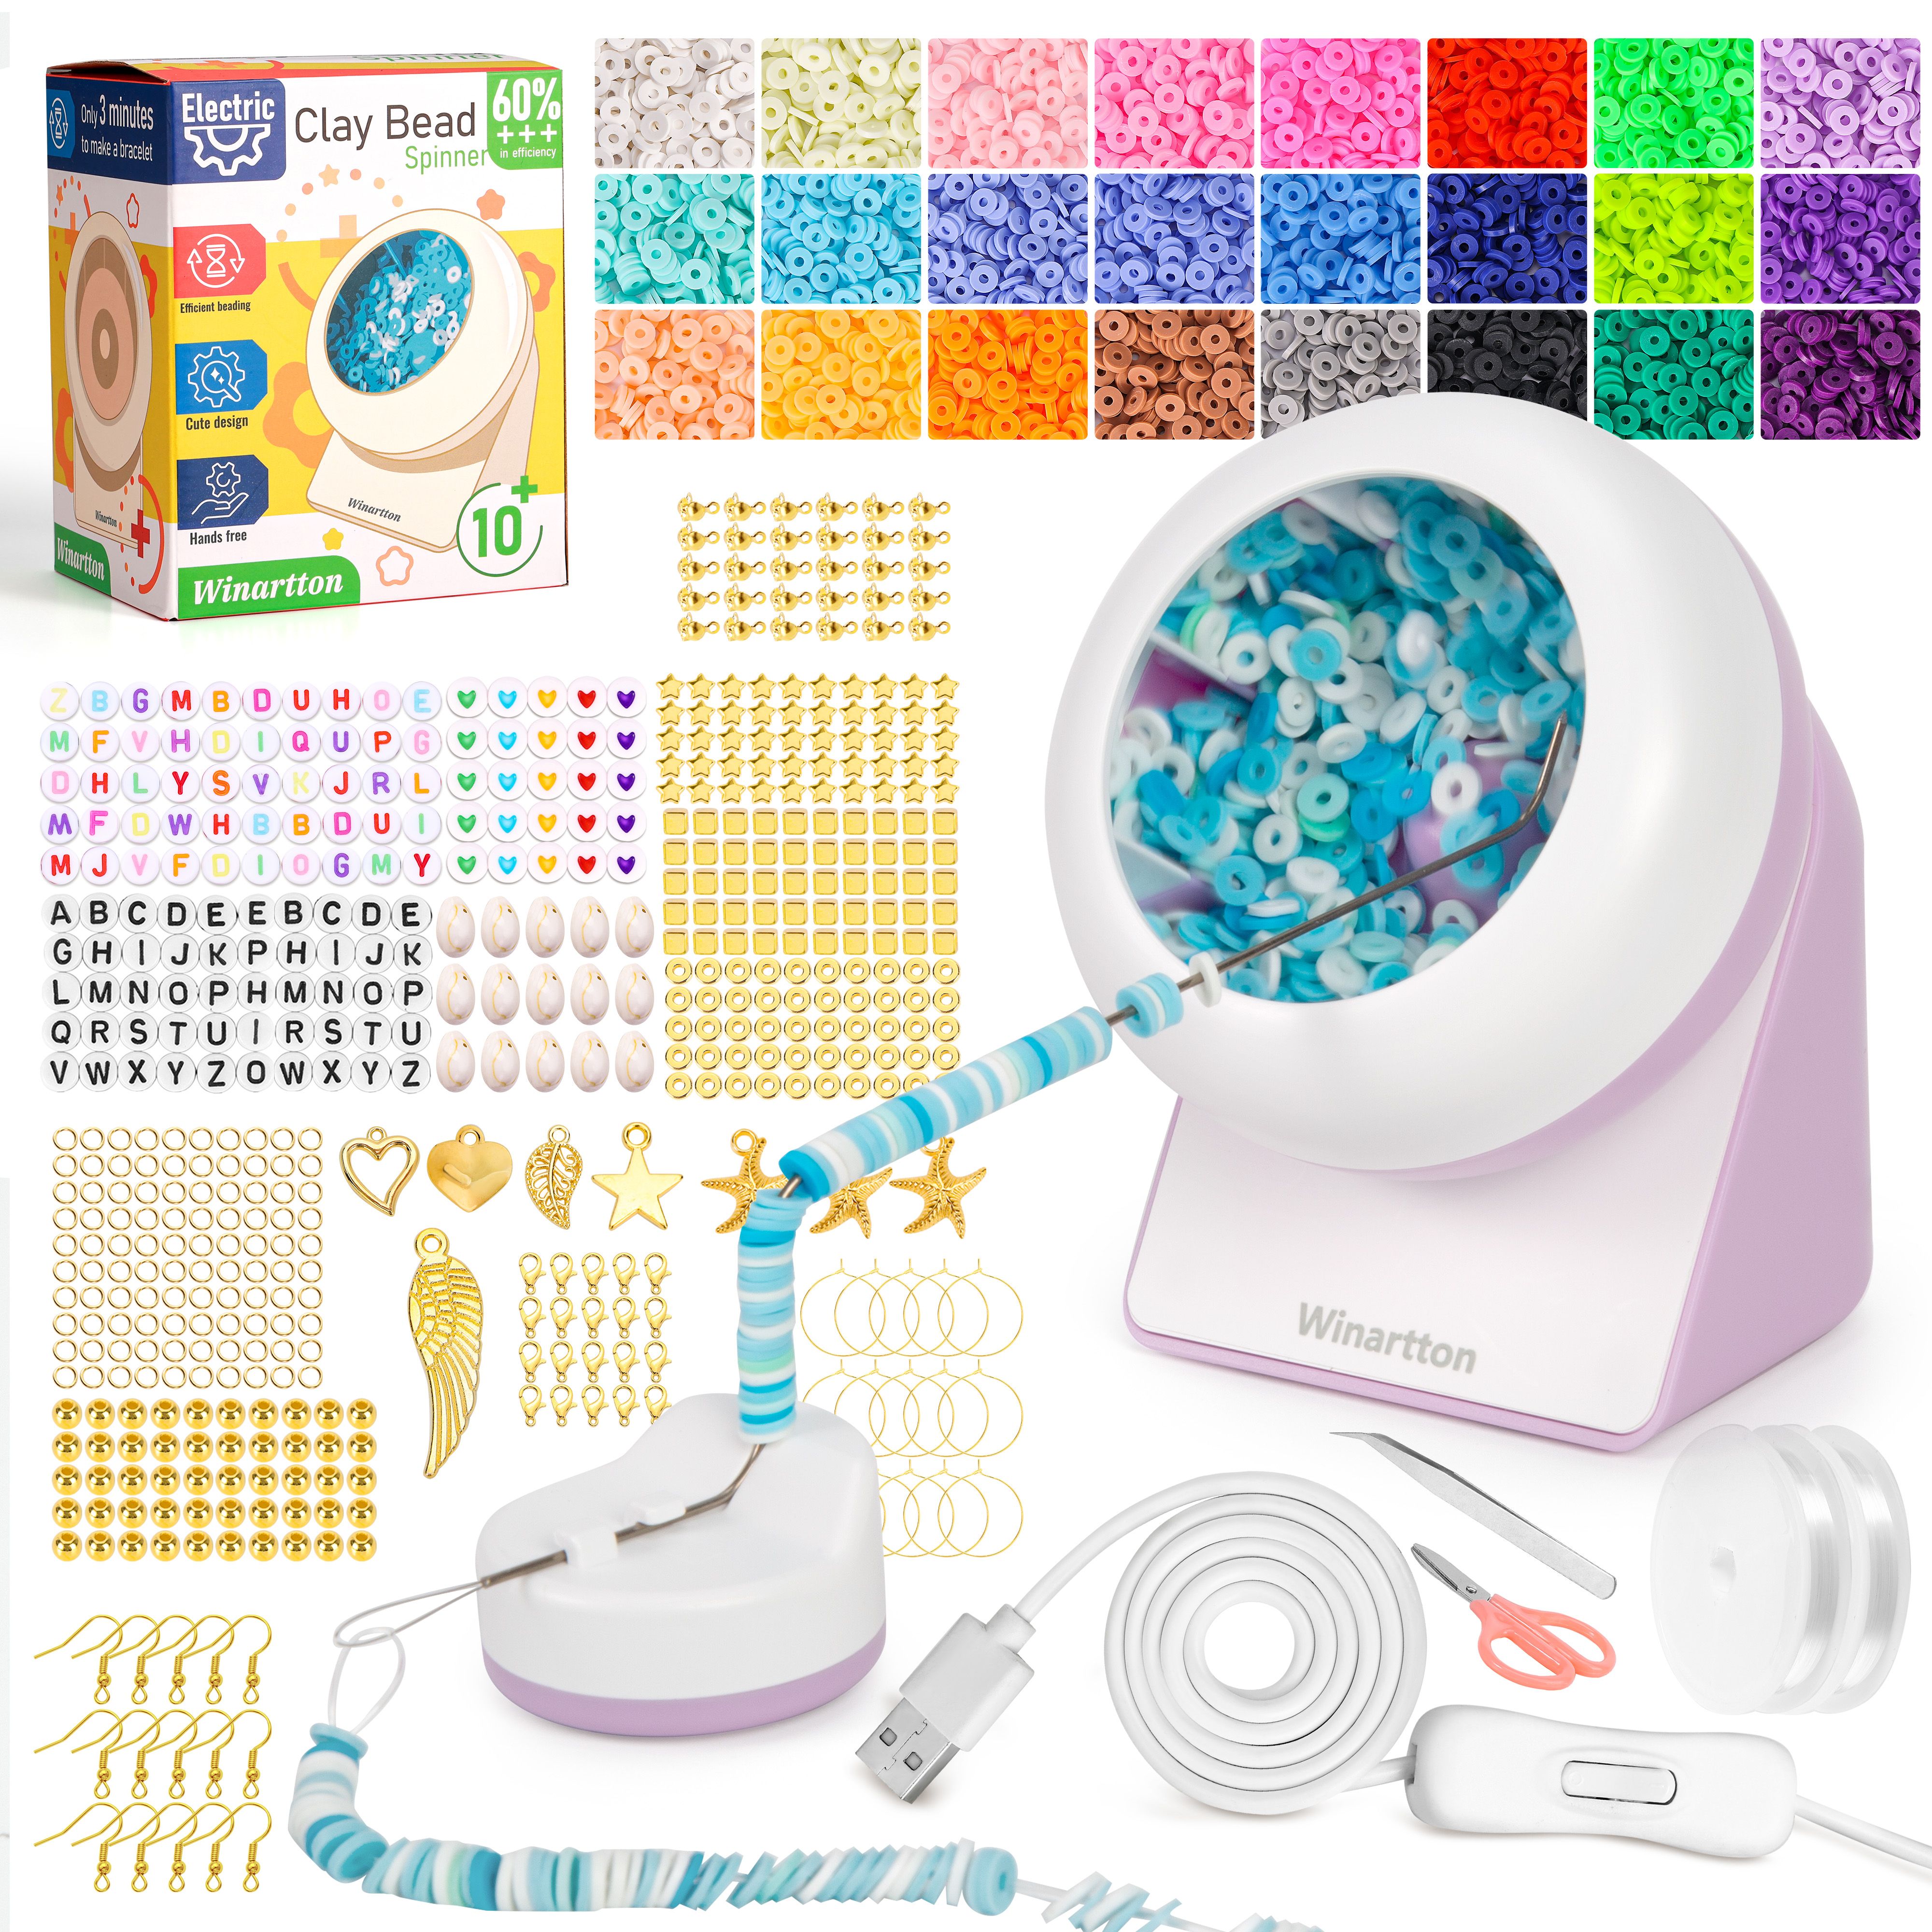  Winartton Electric Spinner Kit with Clay Beads for Jewelry  Making - 2000PCS Beads, Bowl, Spinner Needles and Thread for Waist Beads,  Bracelets, Necklaces, DIY Gifts : Arts, Crafts & Sewing